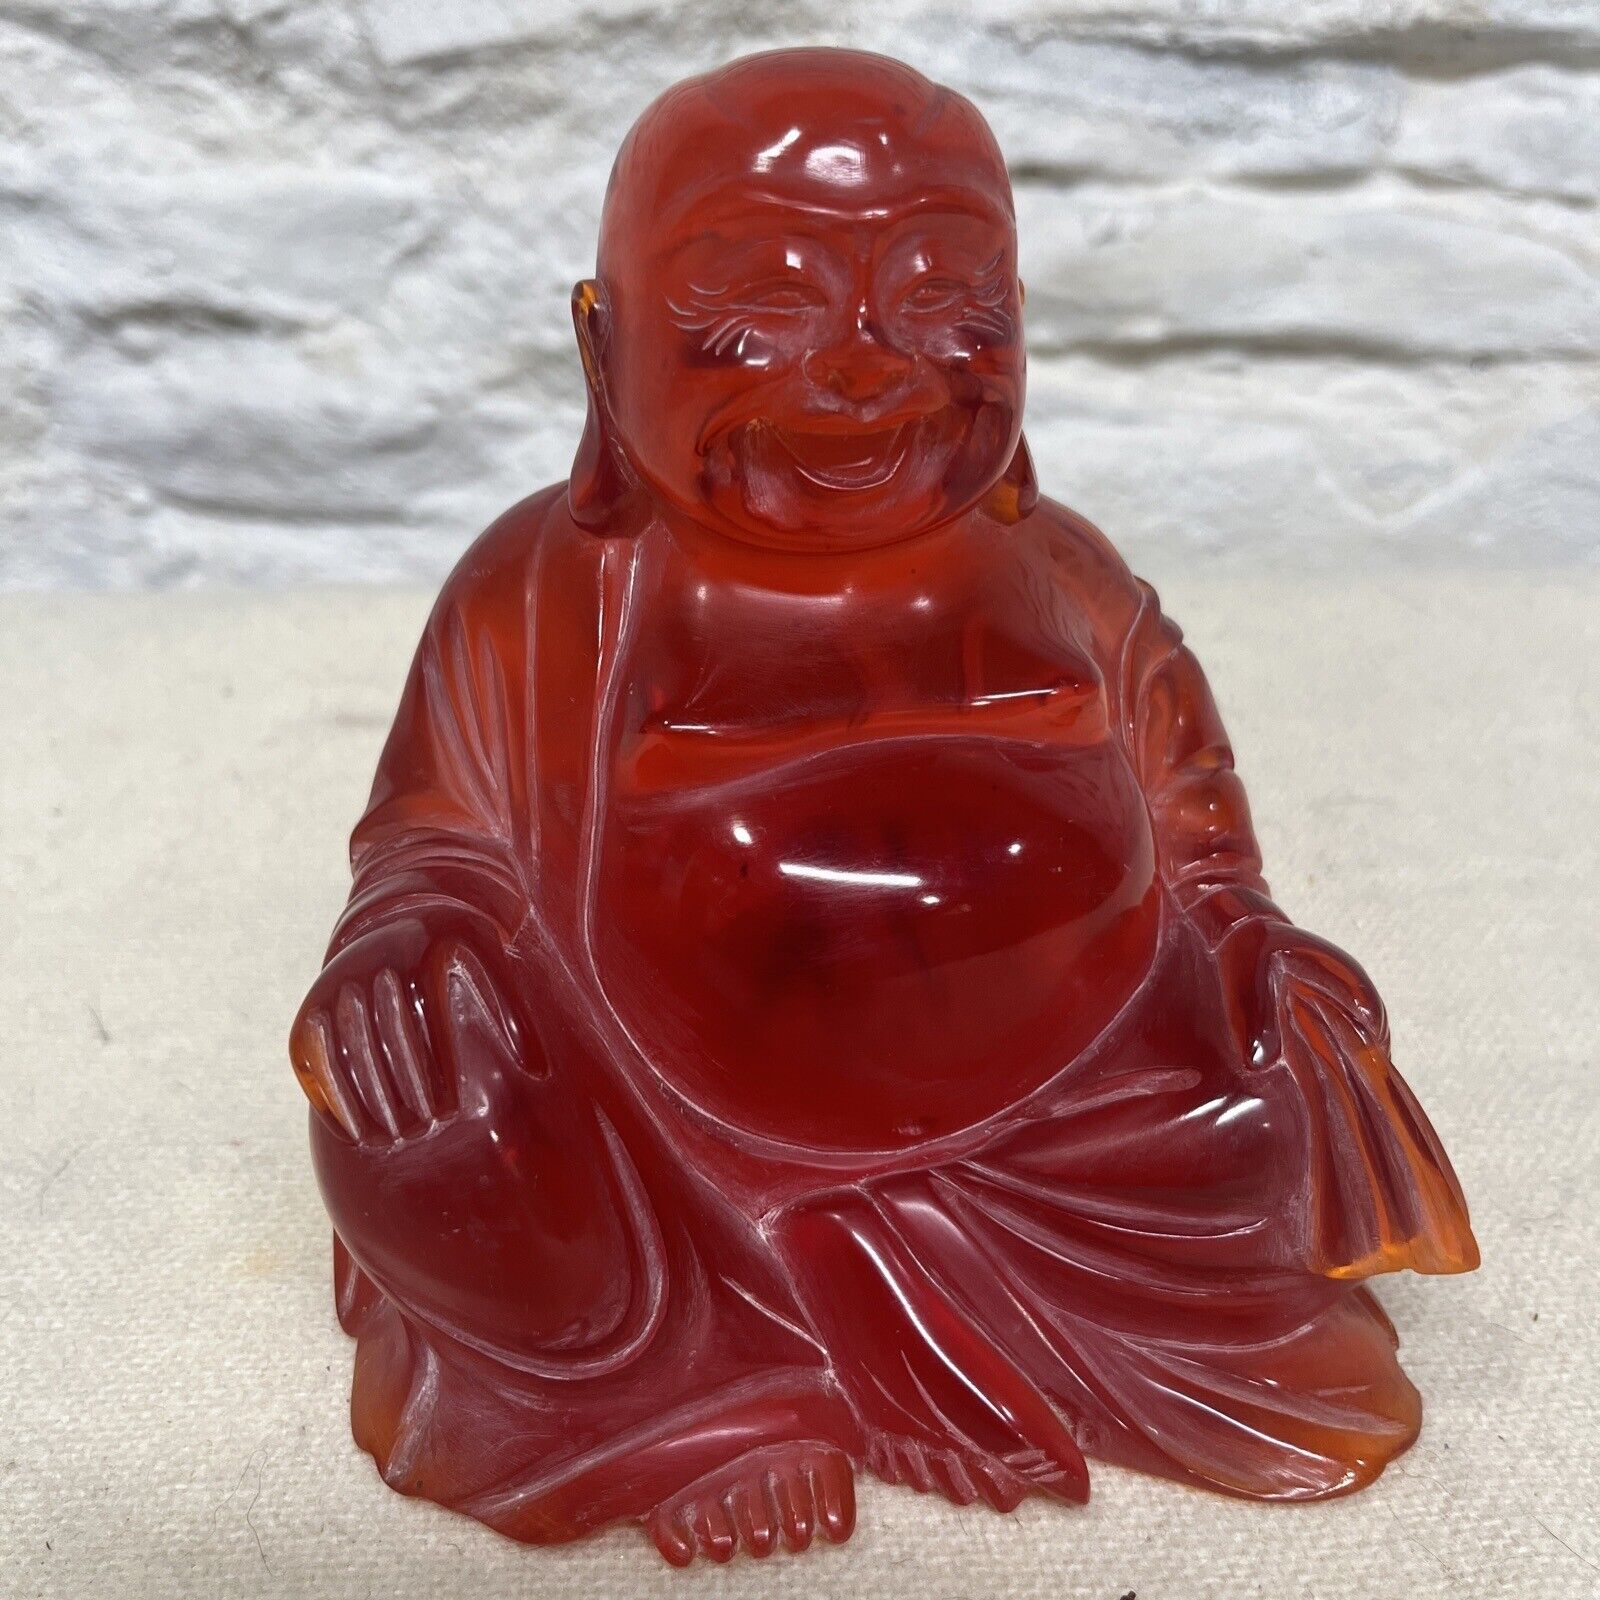 RARE Vintage 60s 70s Red Resin Translucent Happy Sitting Buddha No Stand